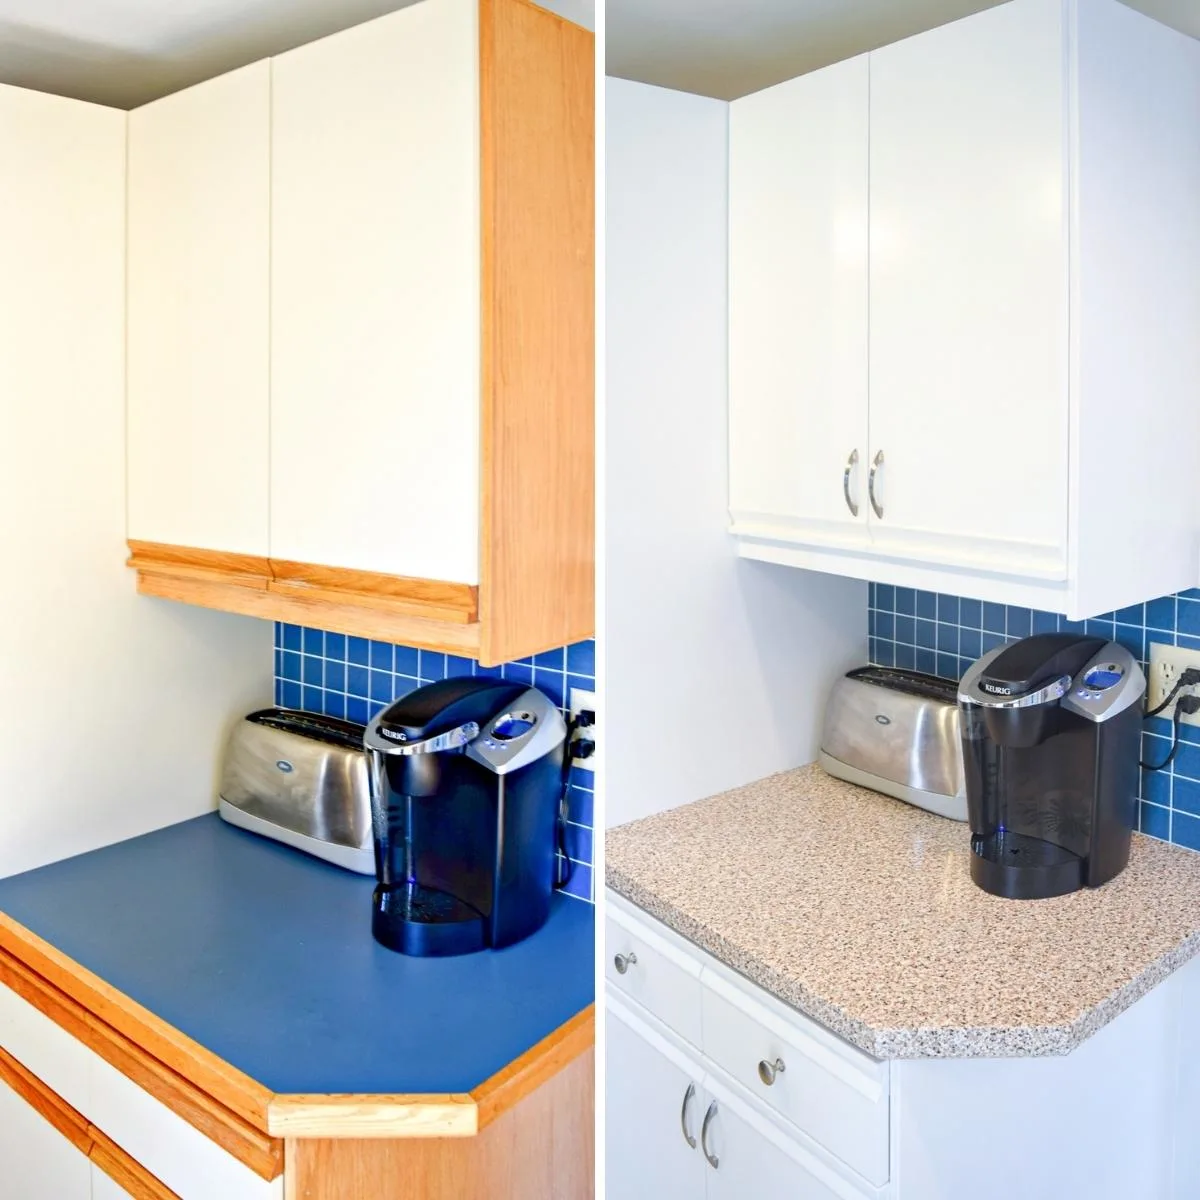 Instantly Update The Look Of Your Kitchen With DIY Shelf Liners